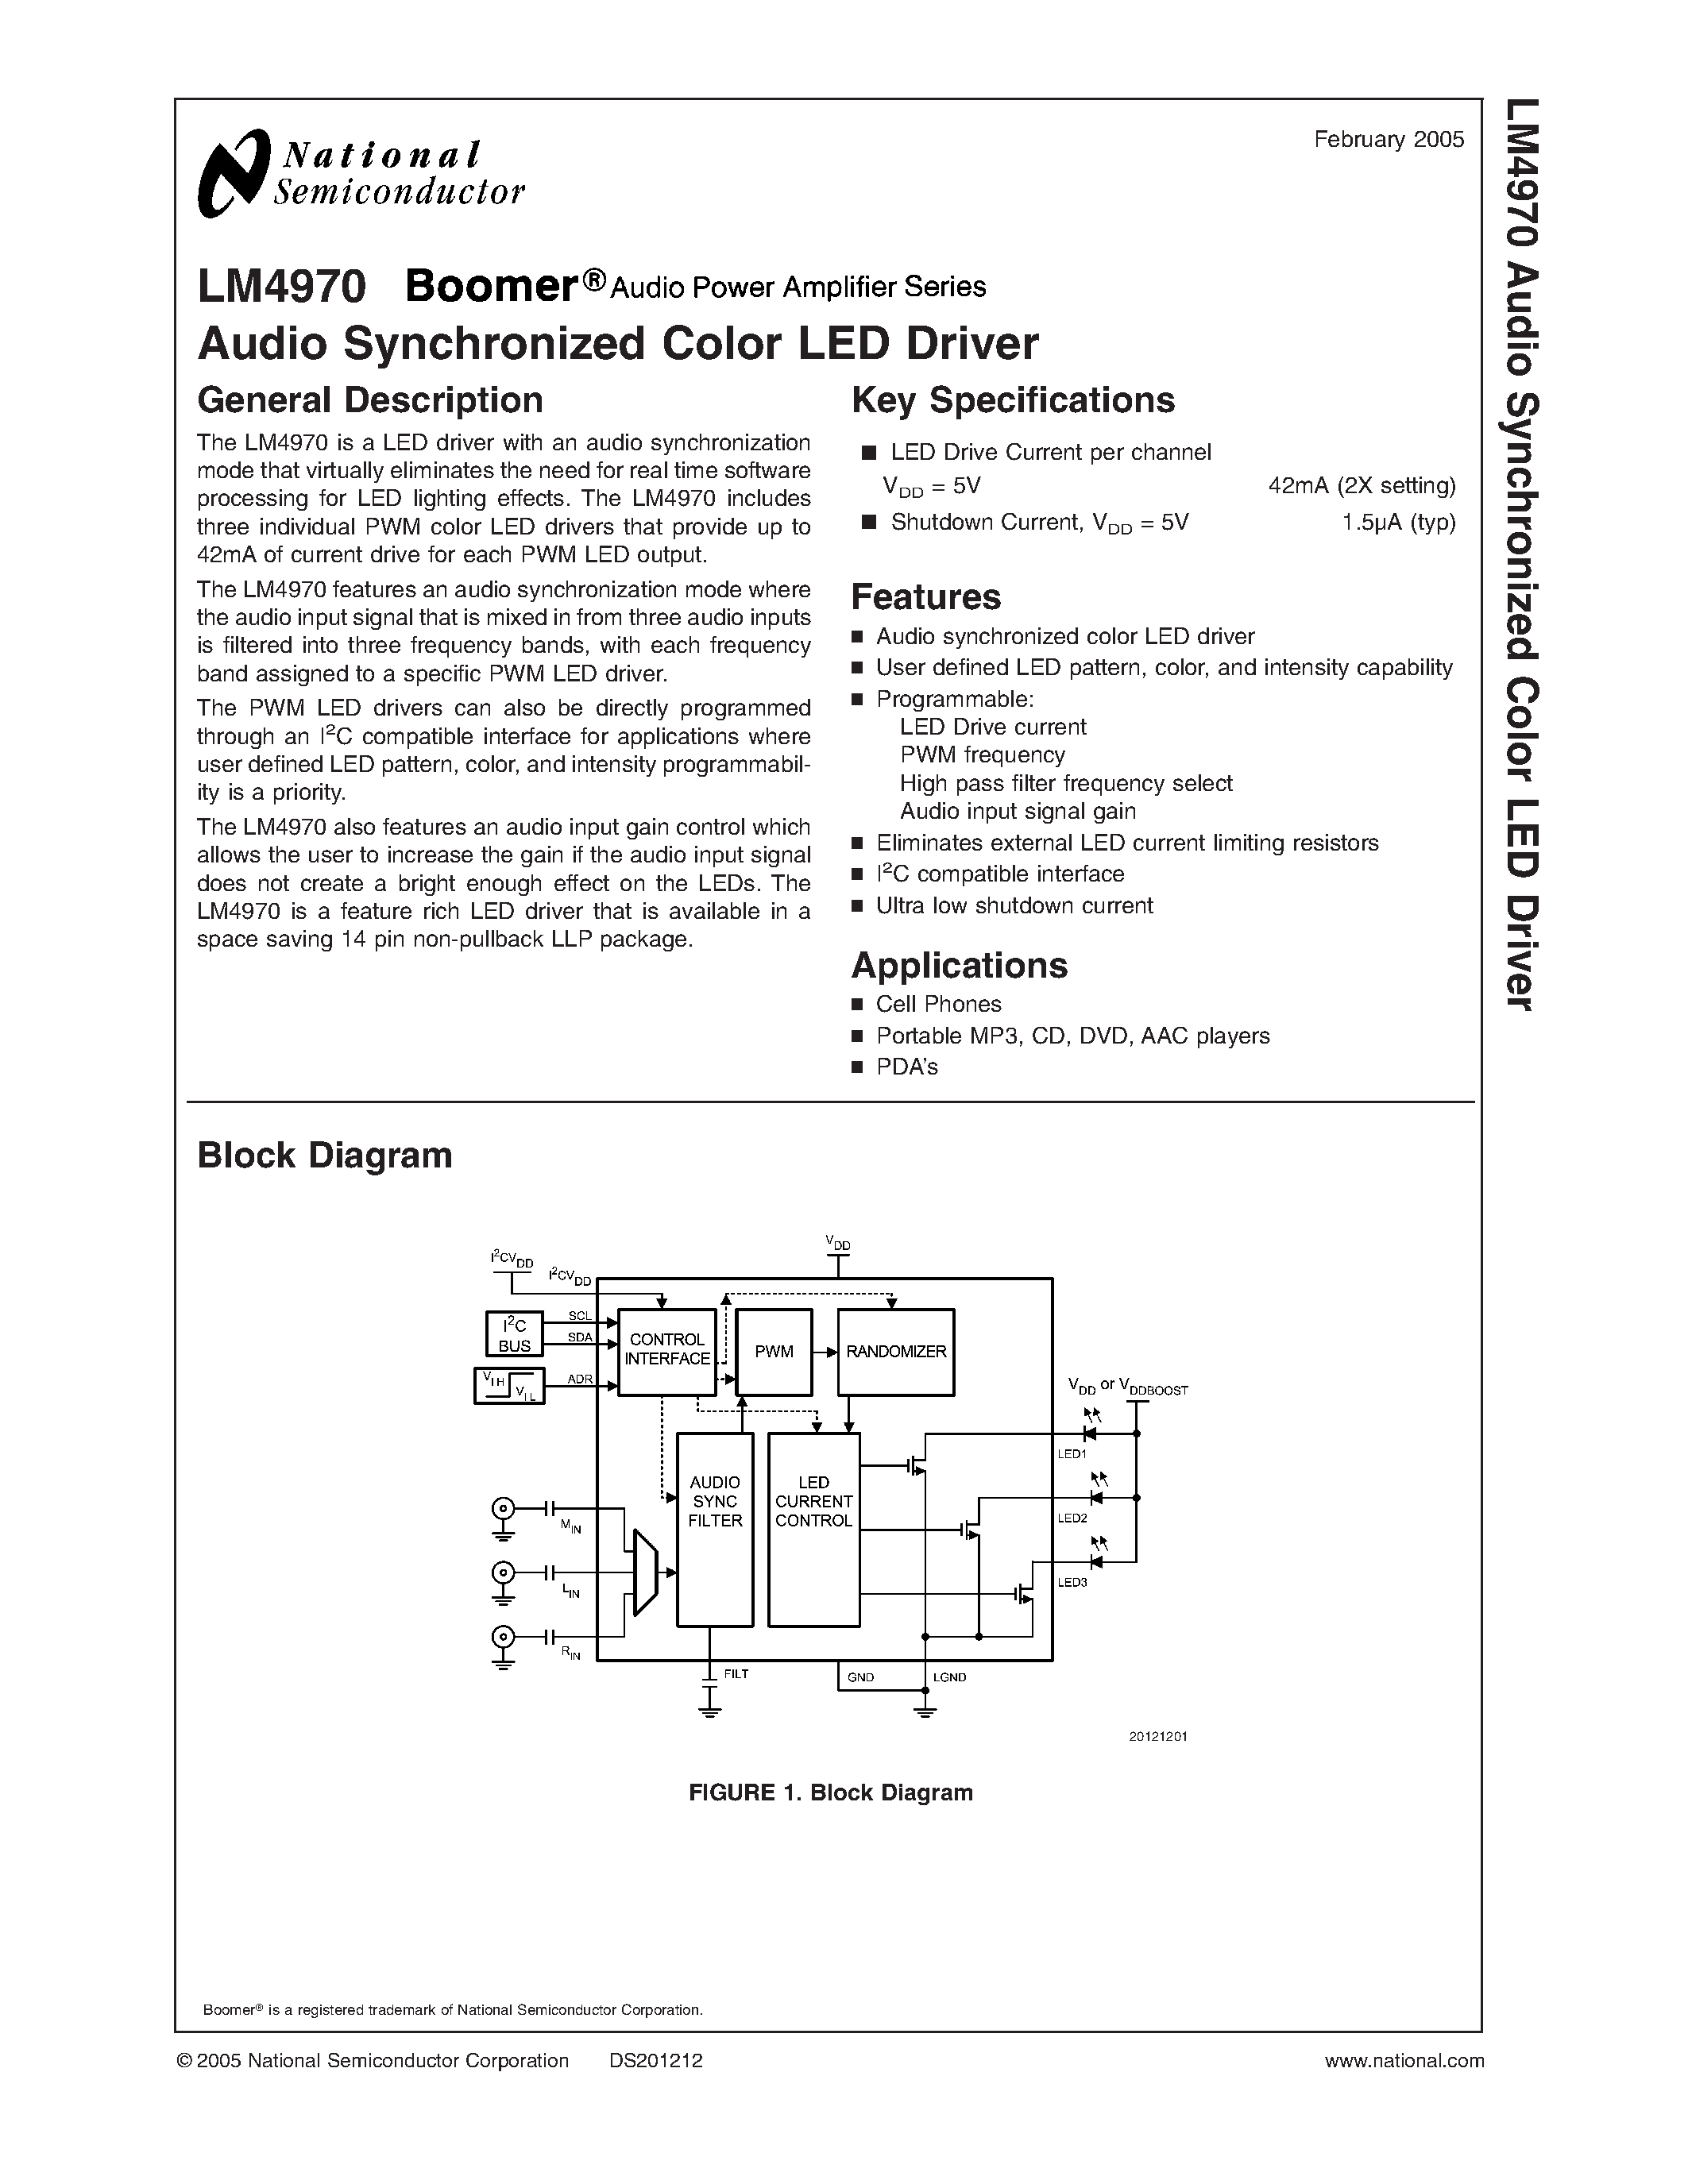 Datasheet LM4970 - Audio Synchronized Color LED Driver page 1